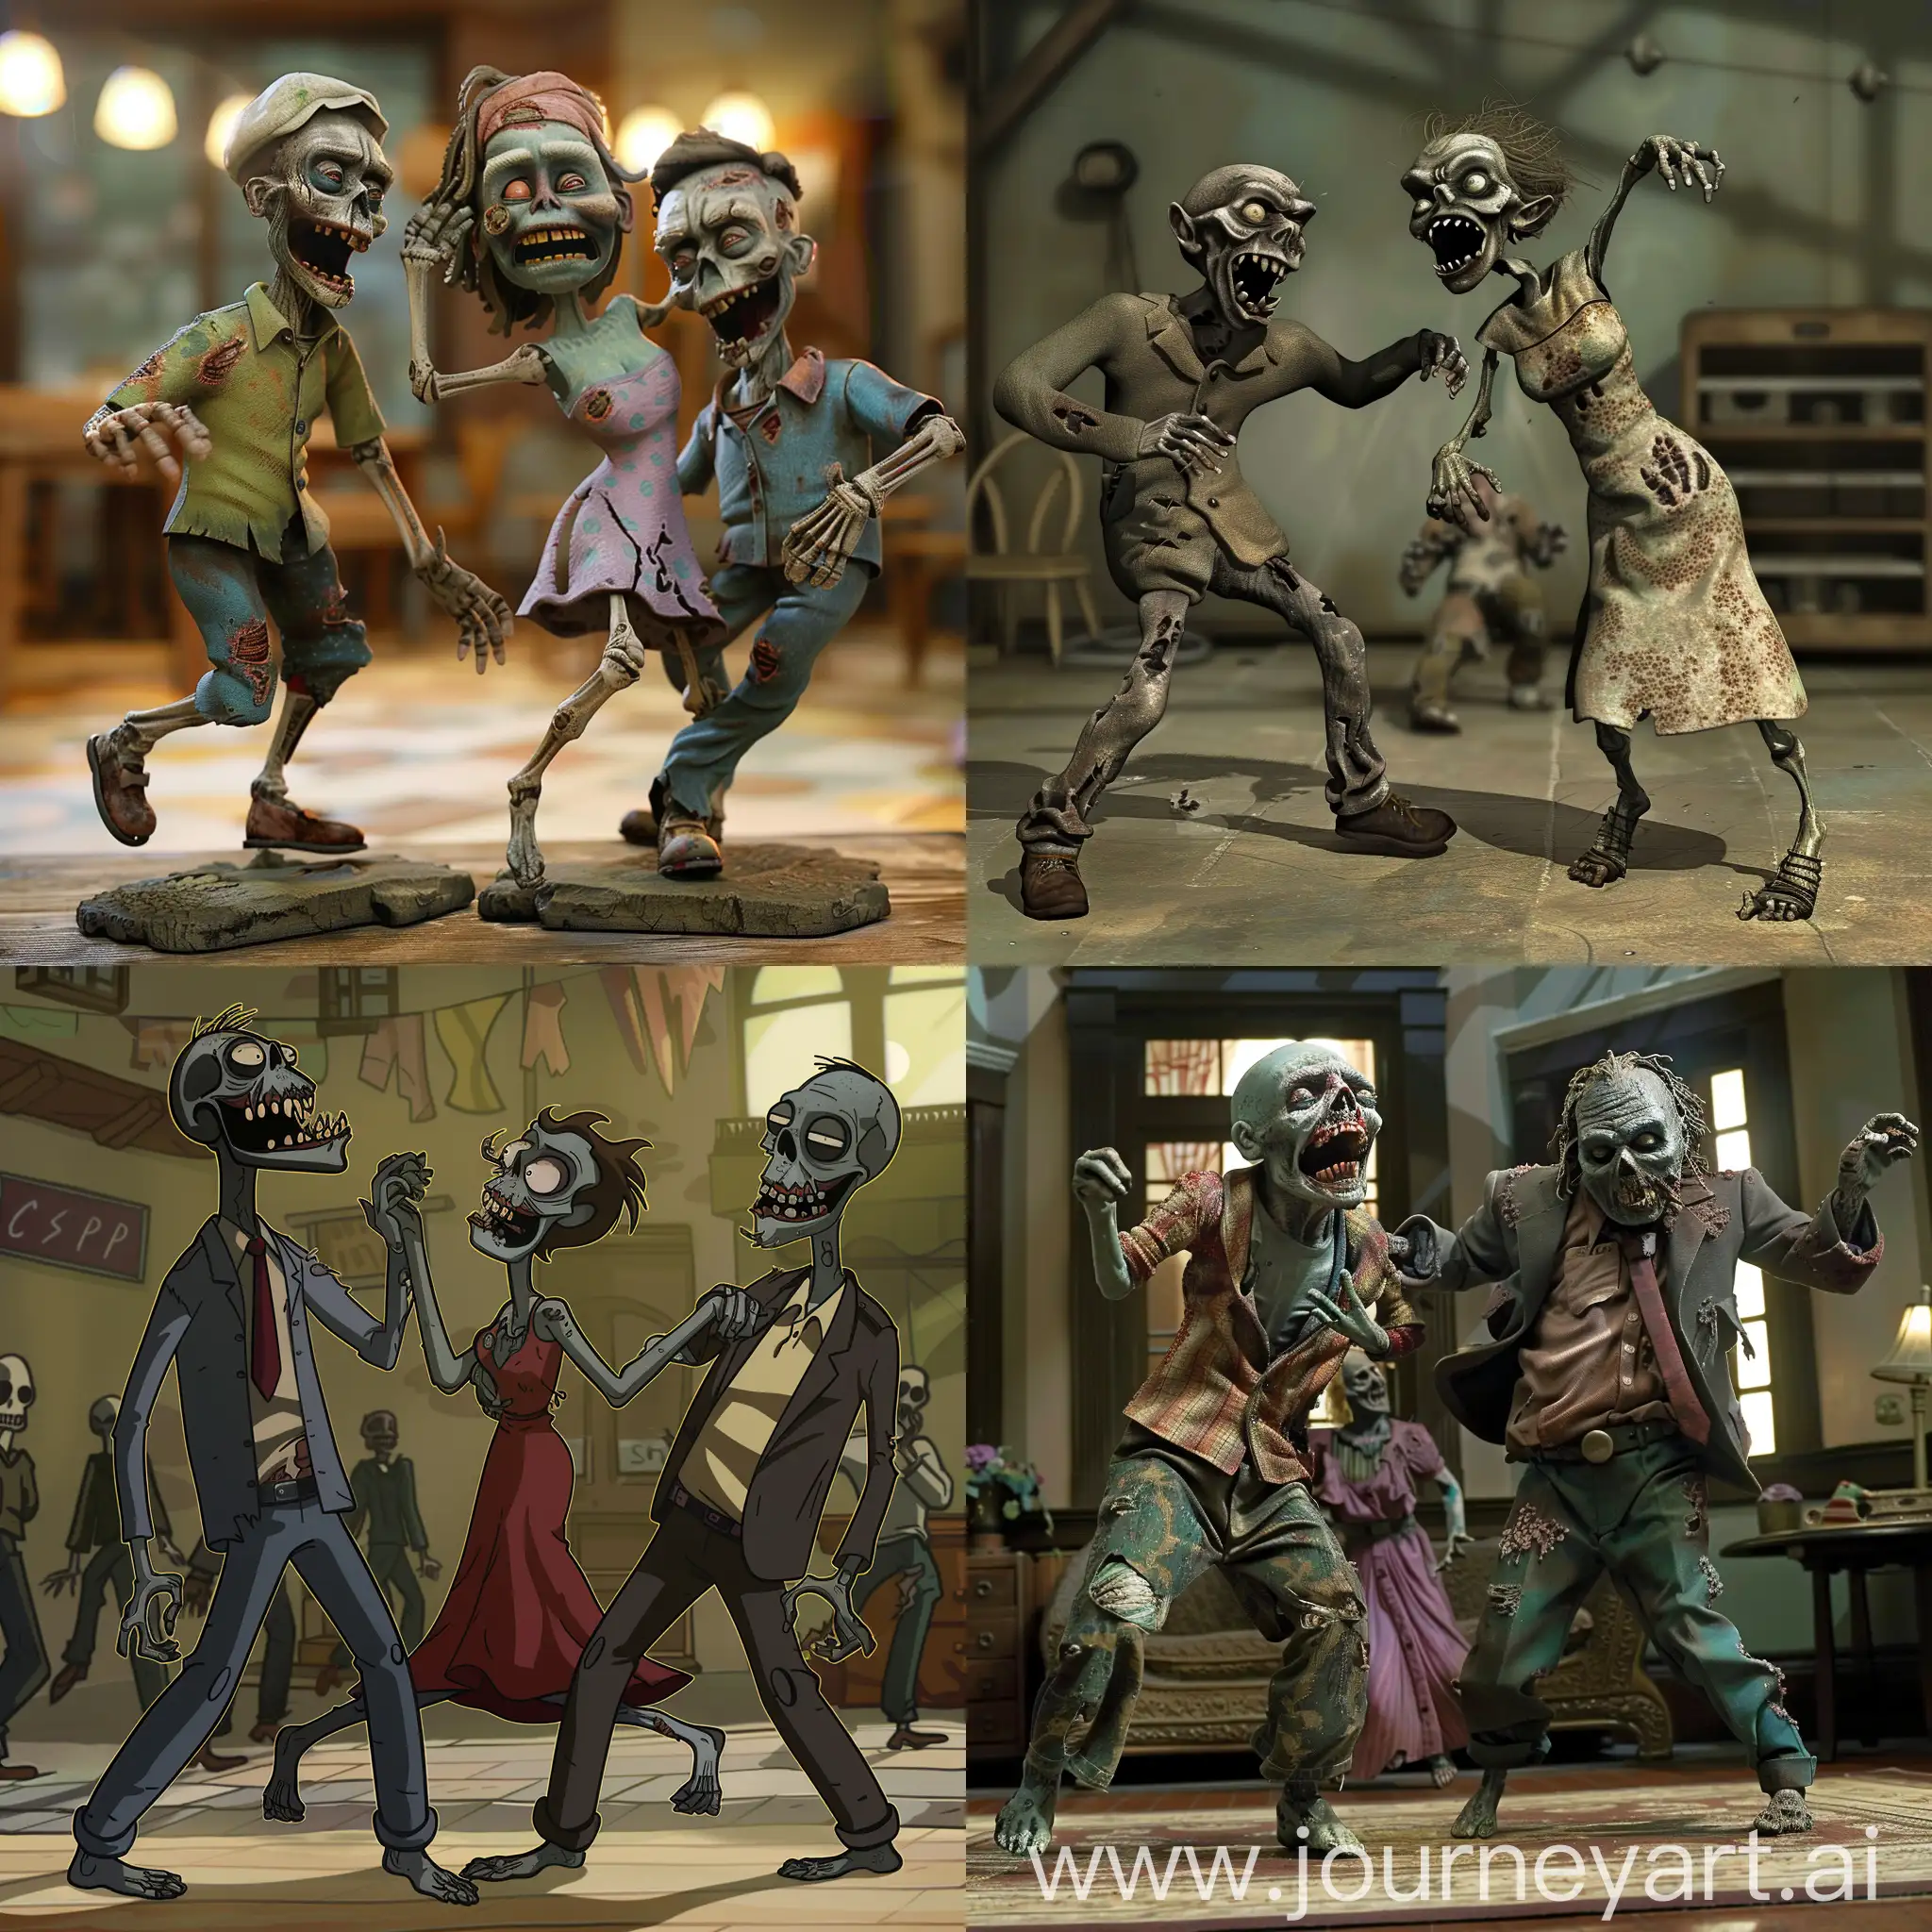 Energetic-Undead-Trio-Grooving-in-Animated-Dance